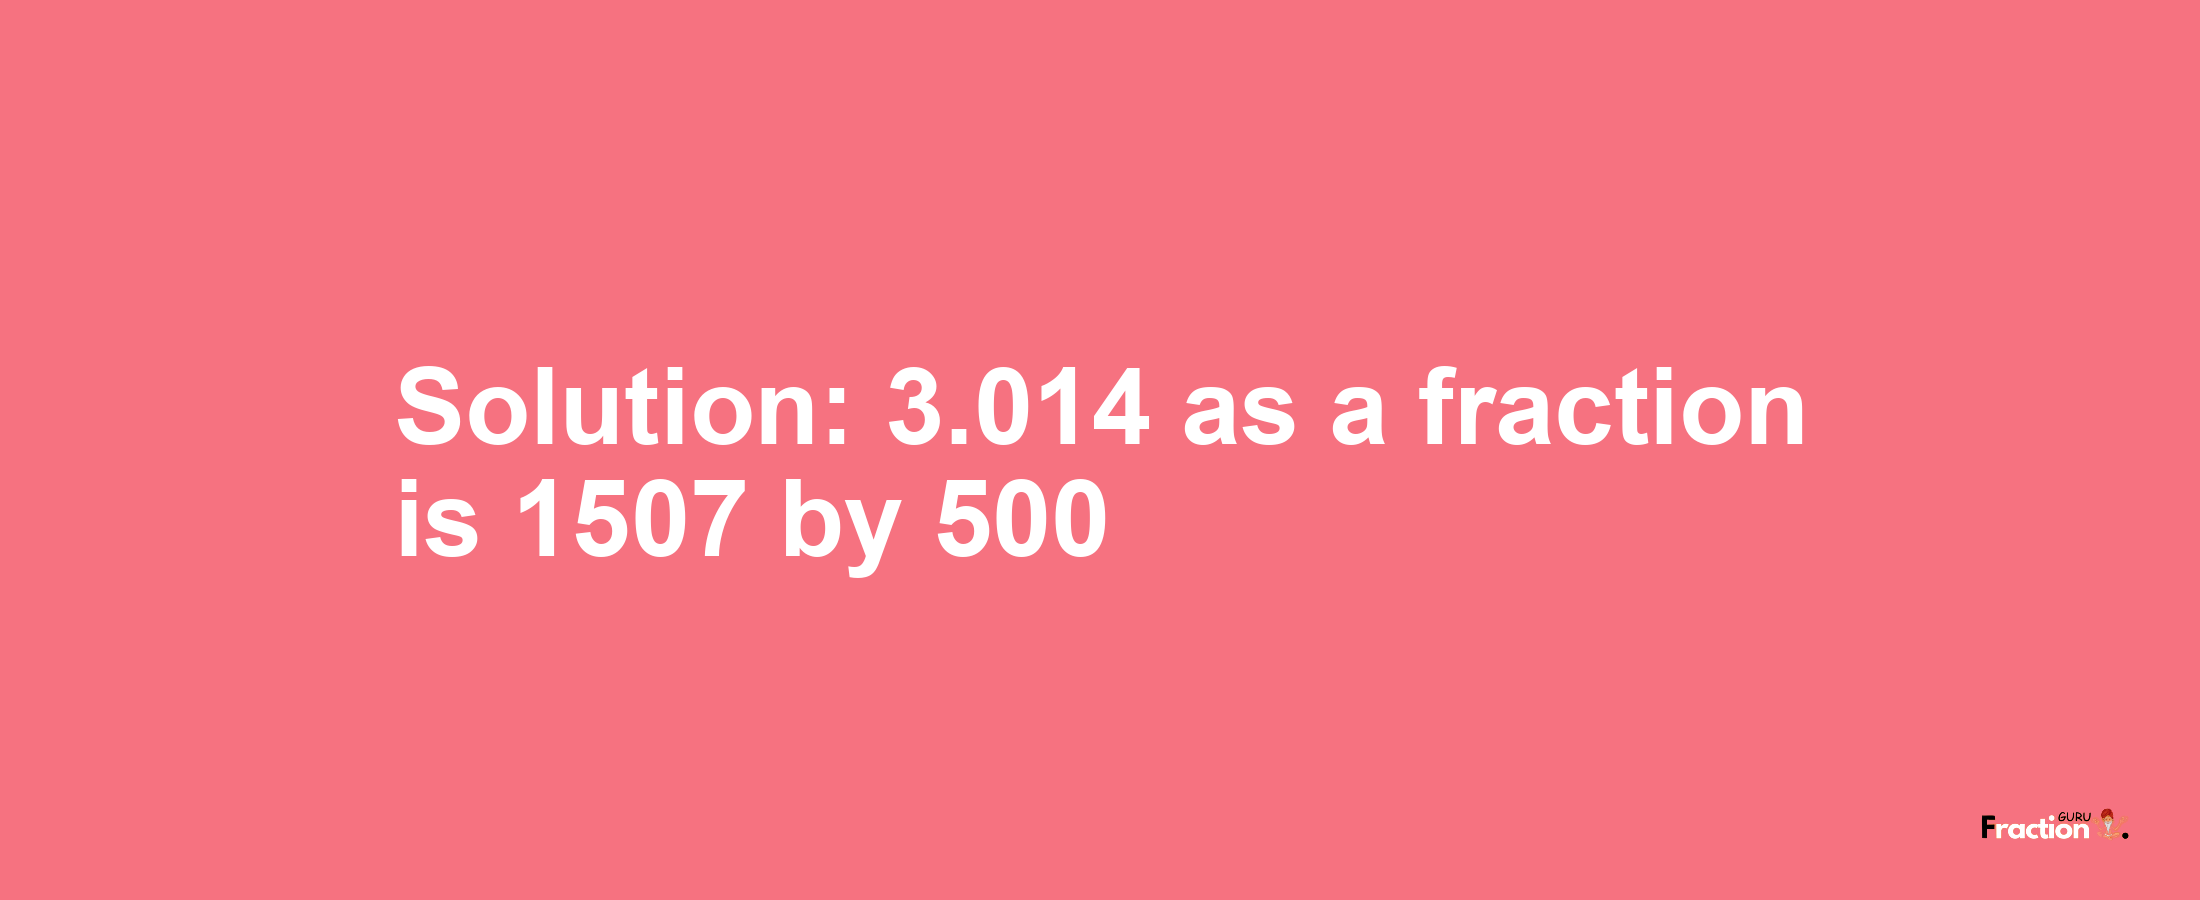 Solution:3.014 as a fraction is 1507/500